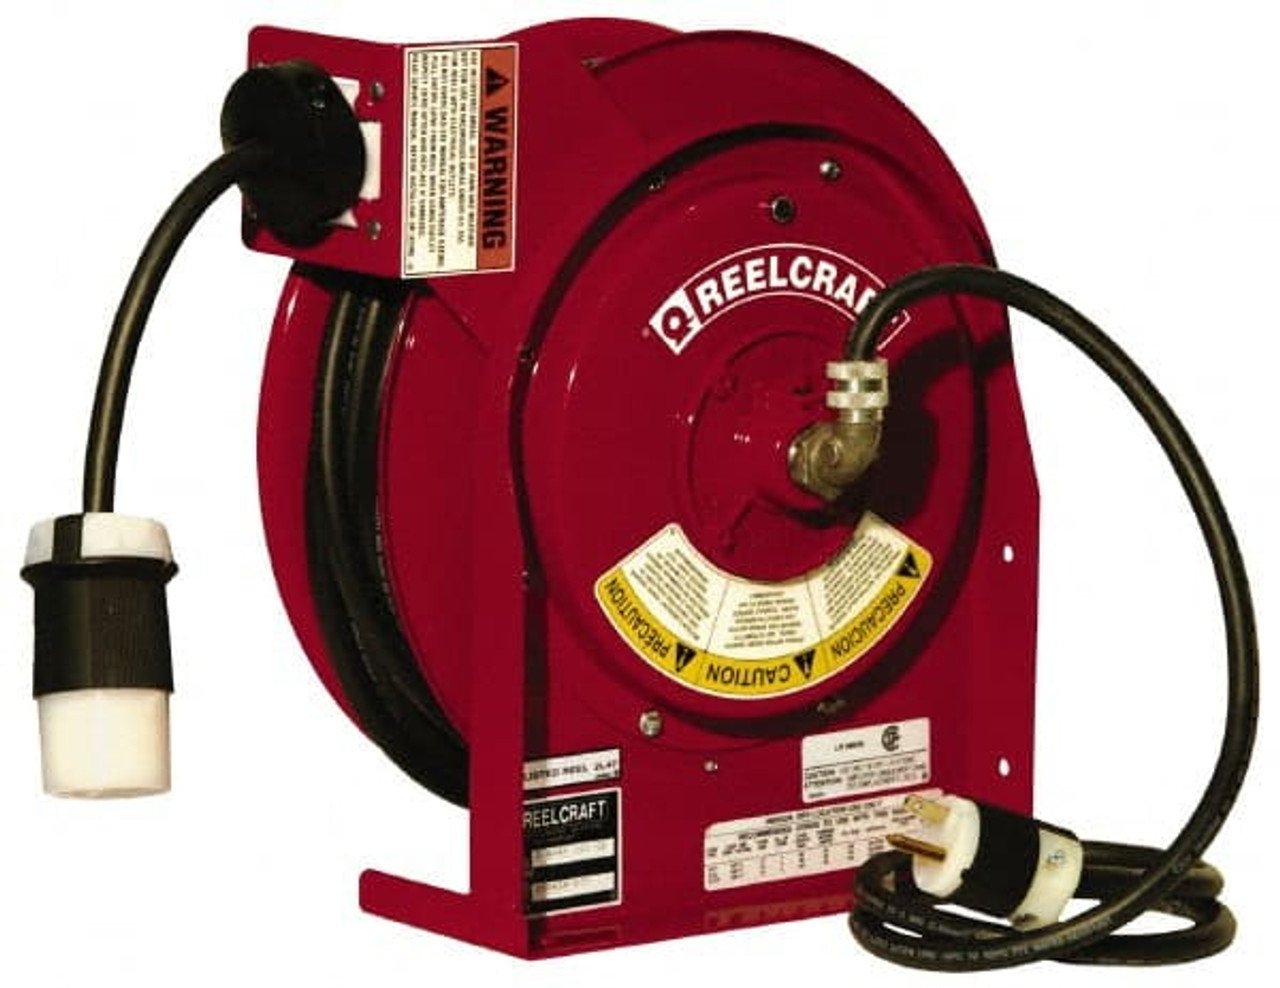 Reelcraft 12 AWG, 45 ft. Cable Length, Cord & Cable Reel with Twist Lock  Receptacle End 1 Outlet, NEMA L5-20R, 20 Amps, 125 Volts, SJEOOW Cable, Red  Reel L 4545 123 3B - 01991207 - Penn Tool Co., Inc